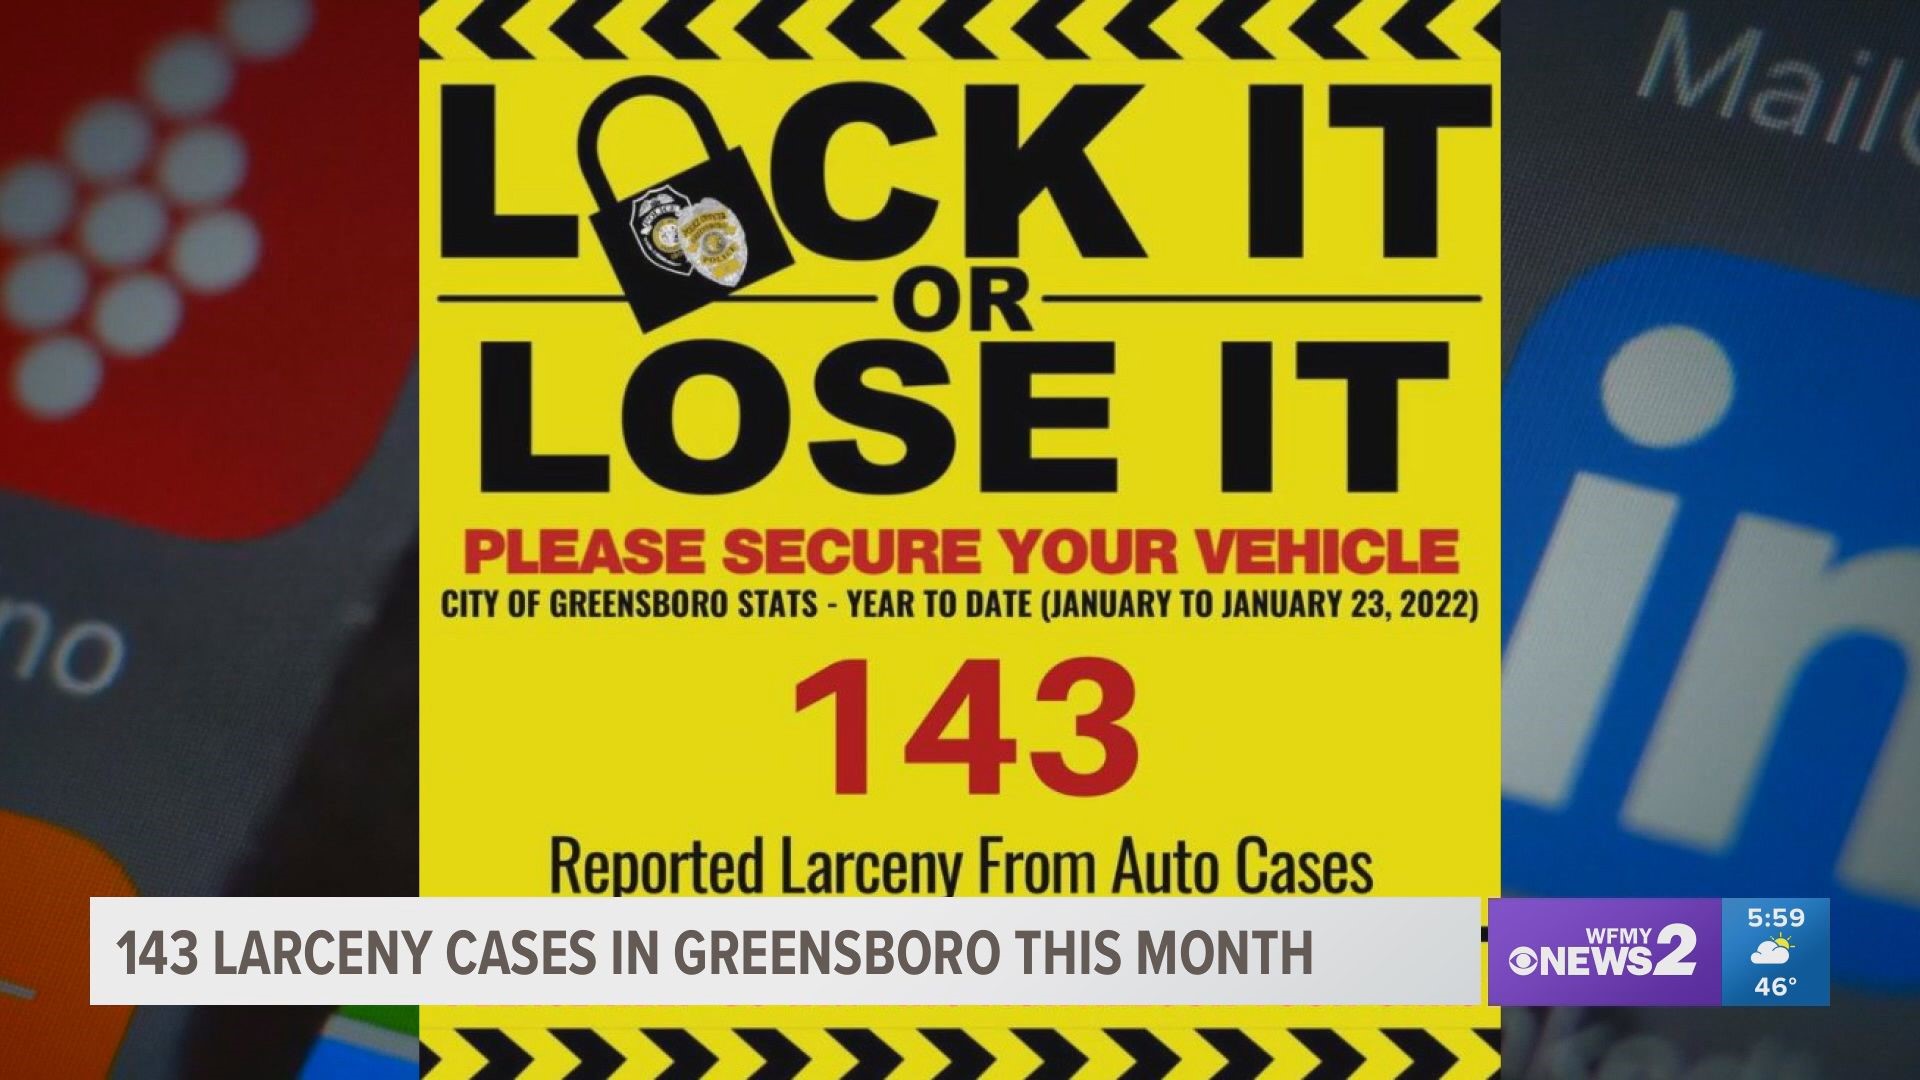 Greensboro police address the slight uptick in car break-ins and theft reports.